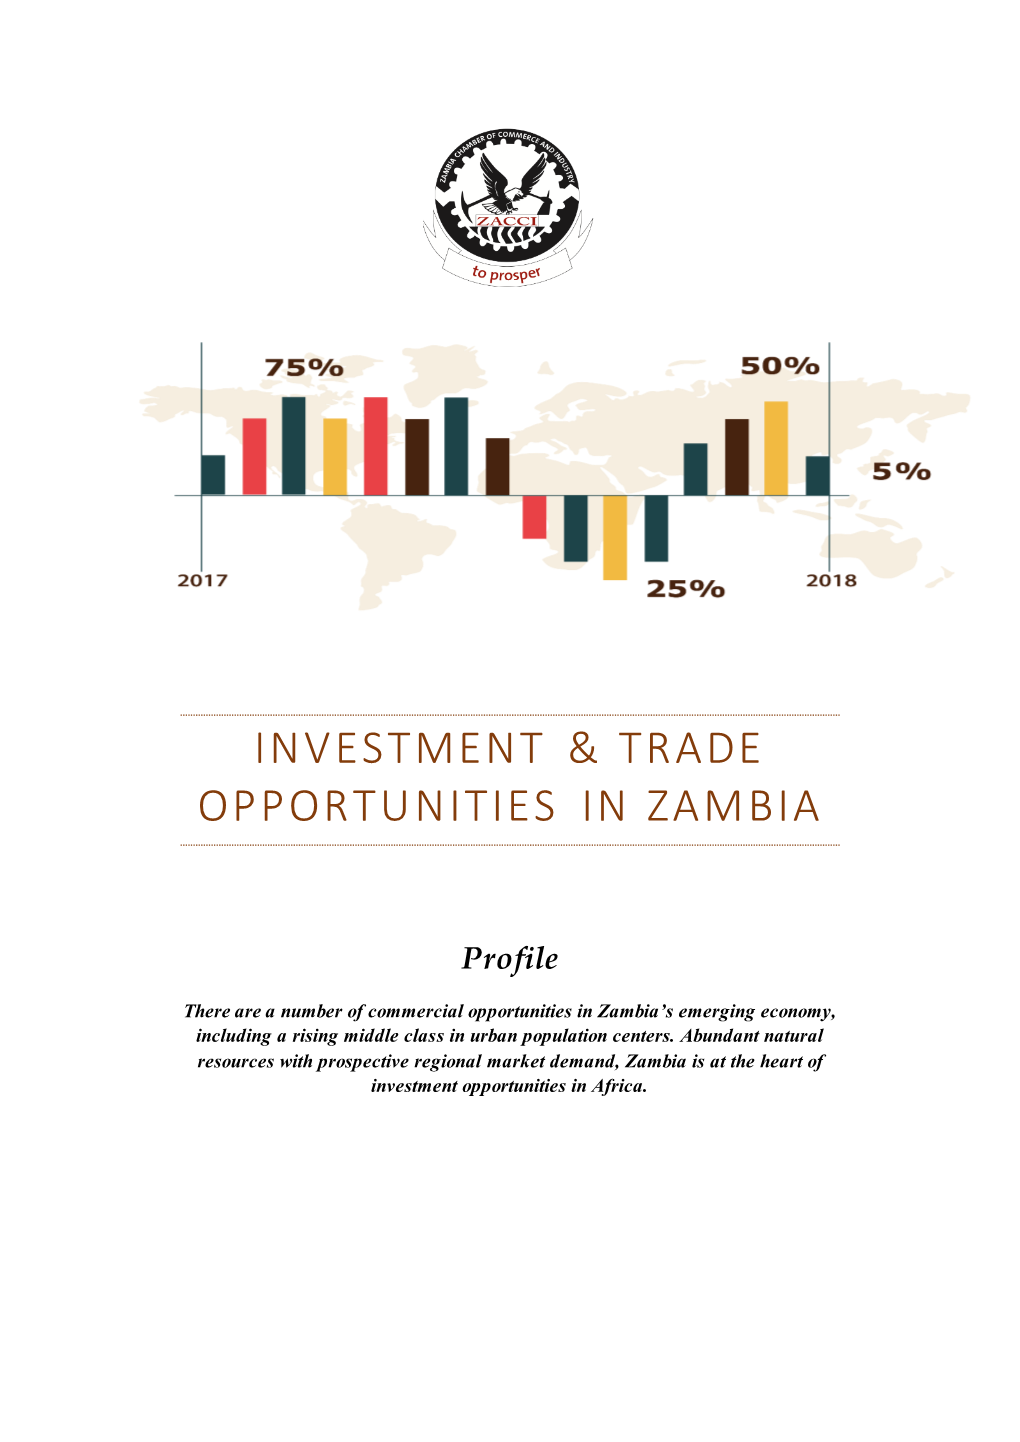 Investment & Trade Opportunities in Zambia